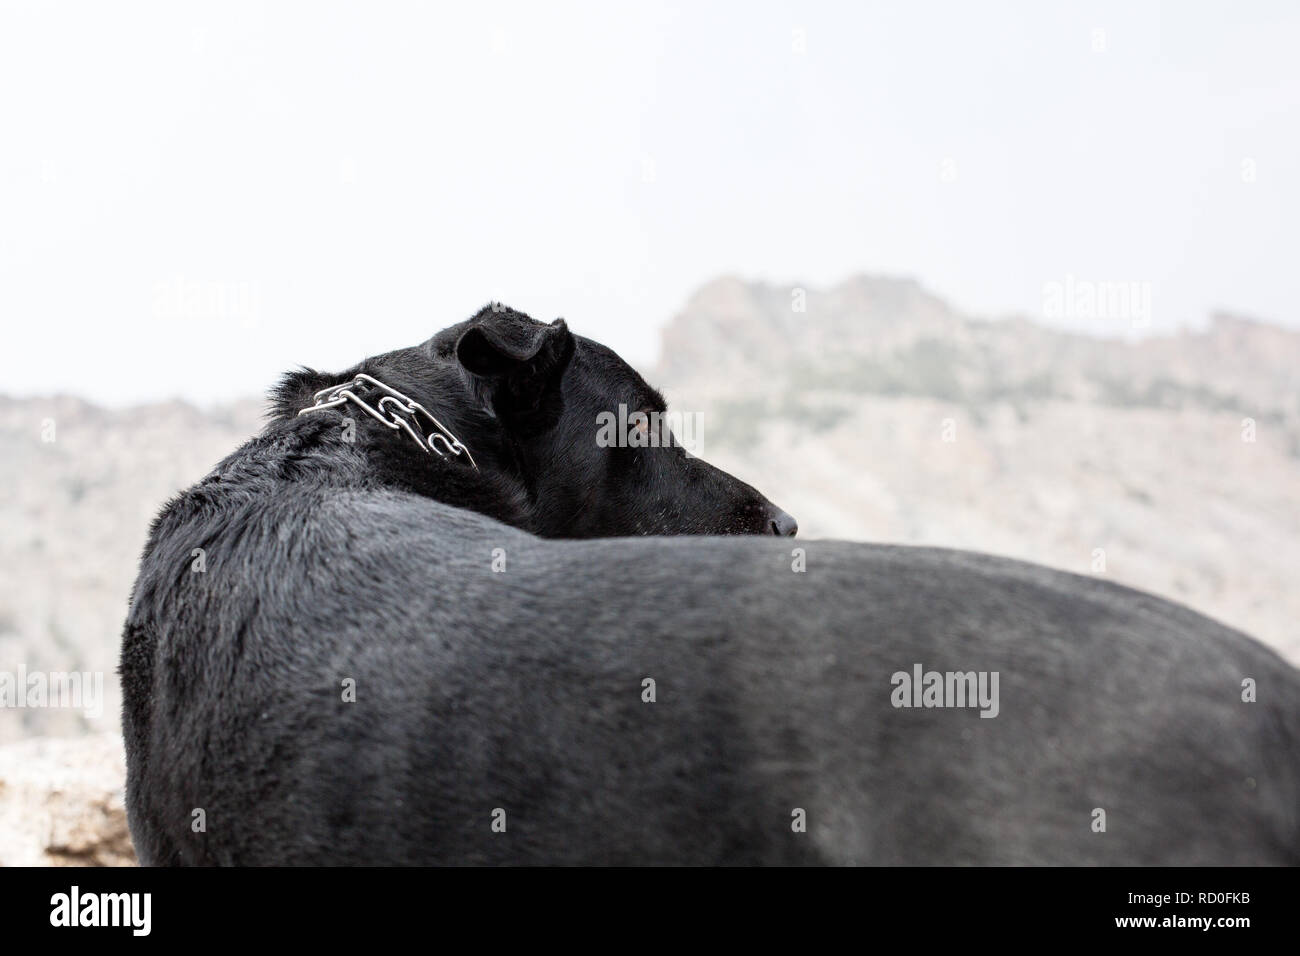 Black dog standing in mountain Landscape, United States Stock Photo